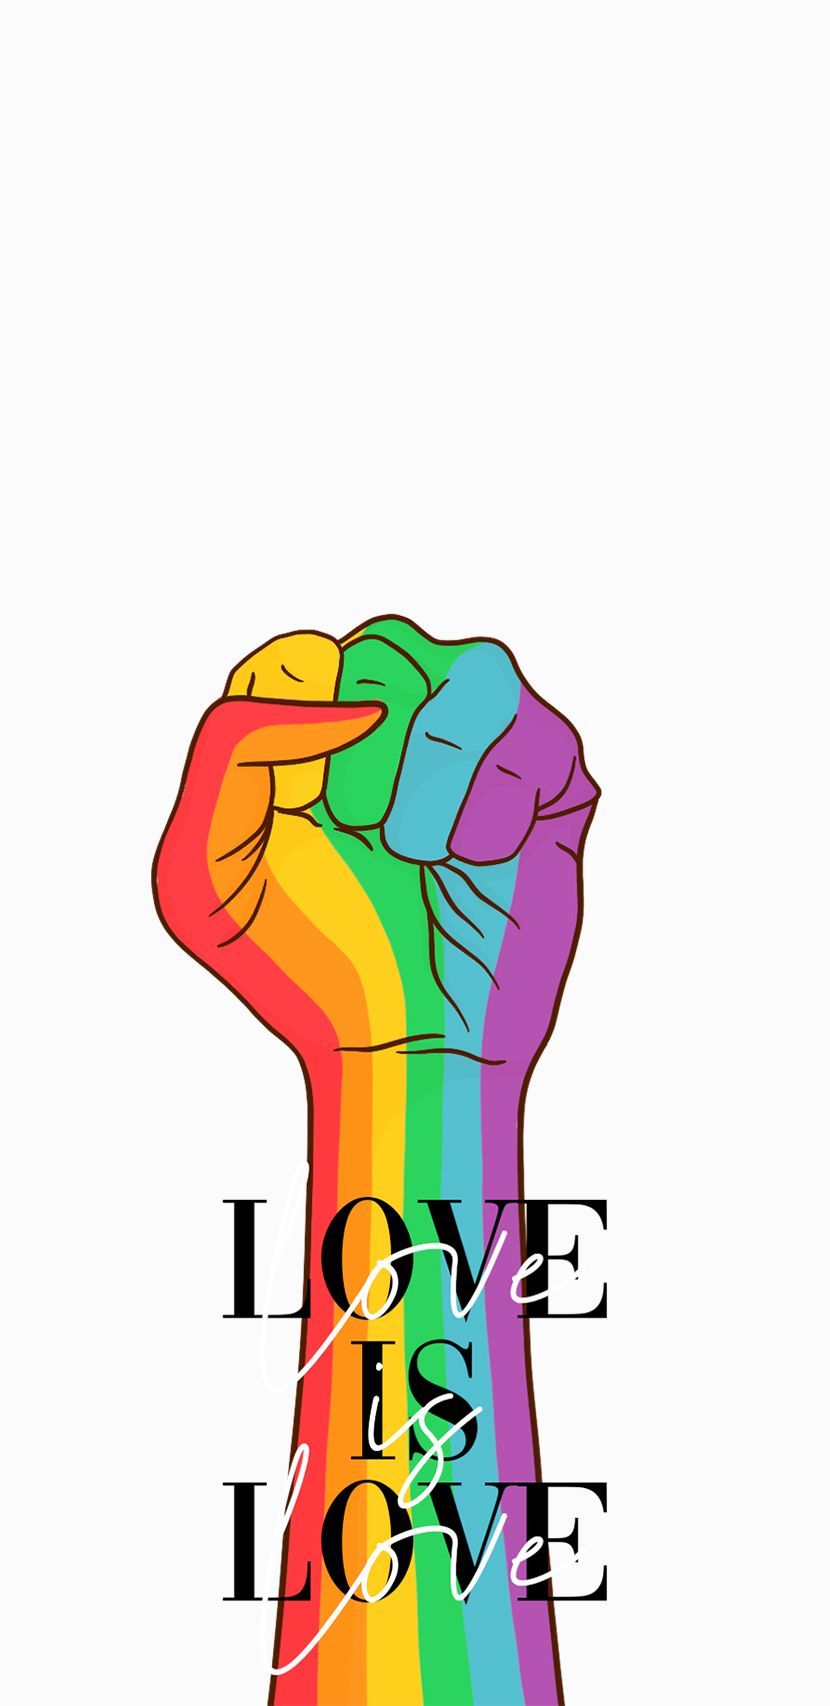 IPhone wallpaper with a rainbow fist and the text 